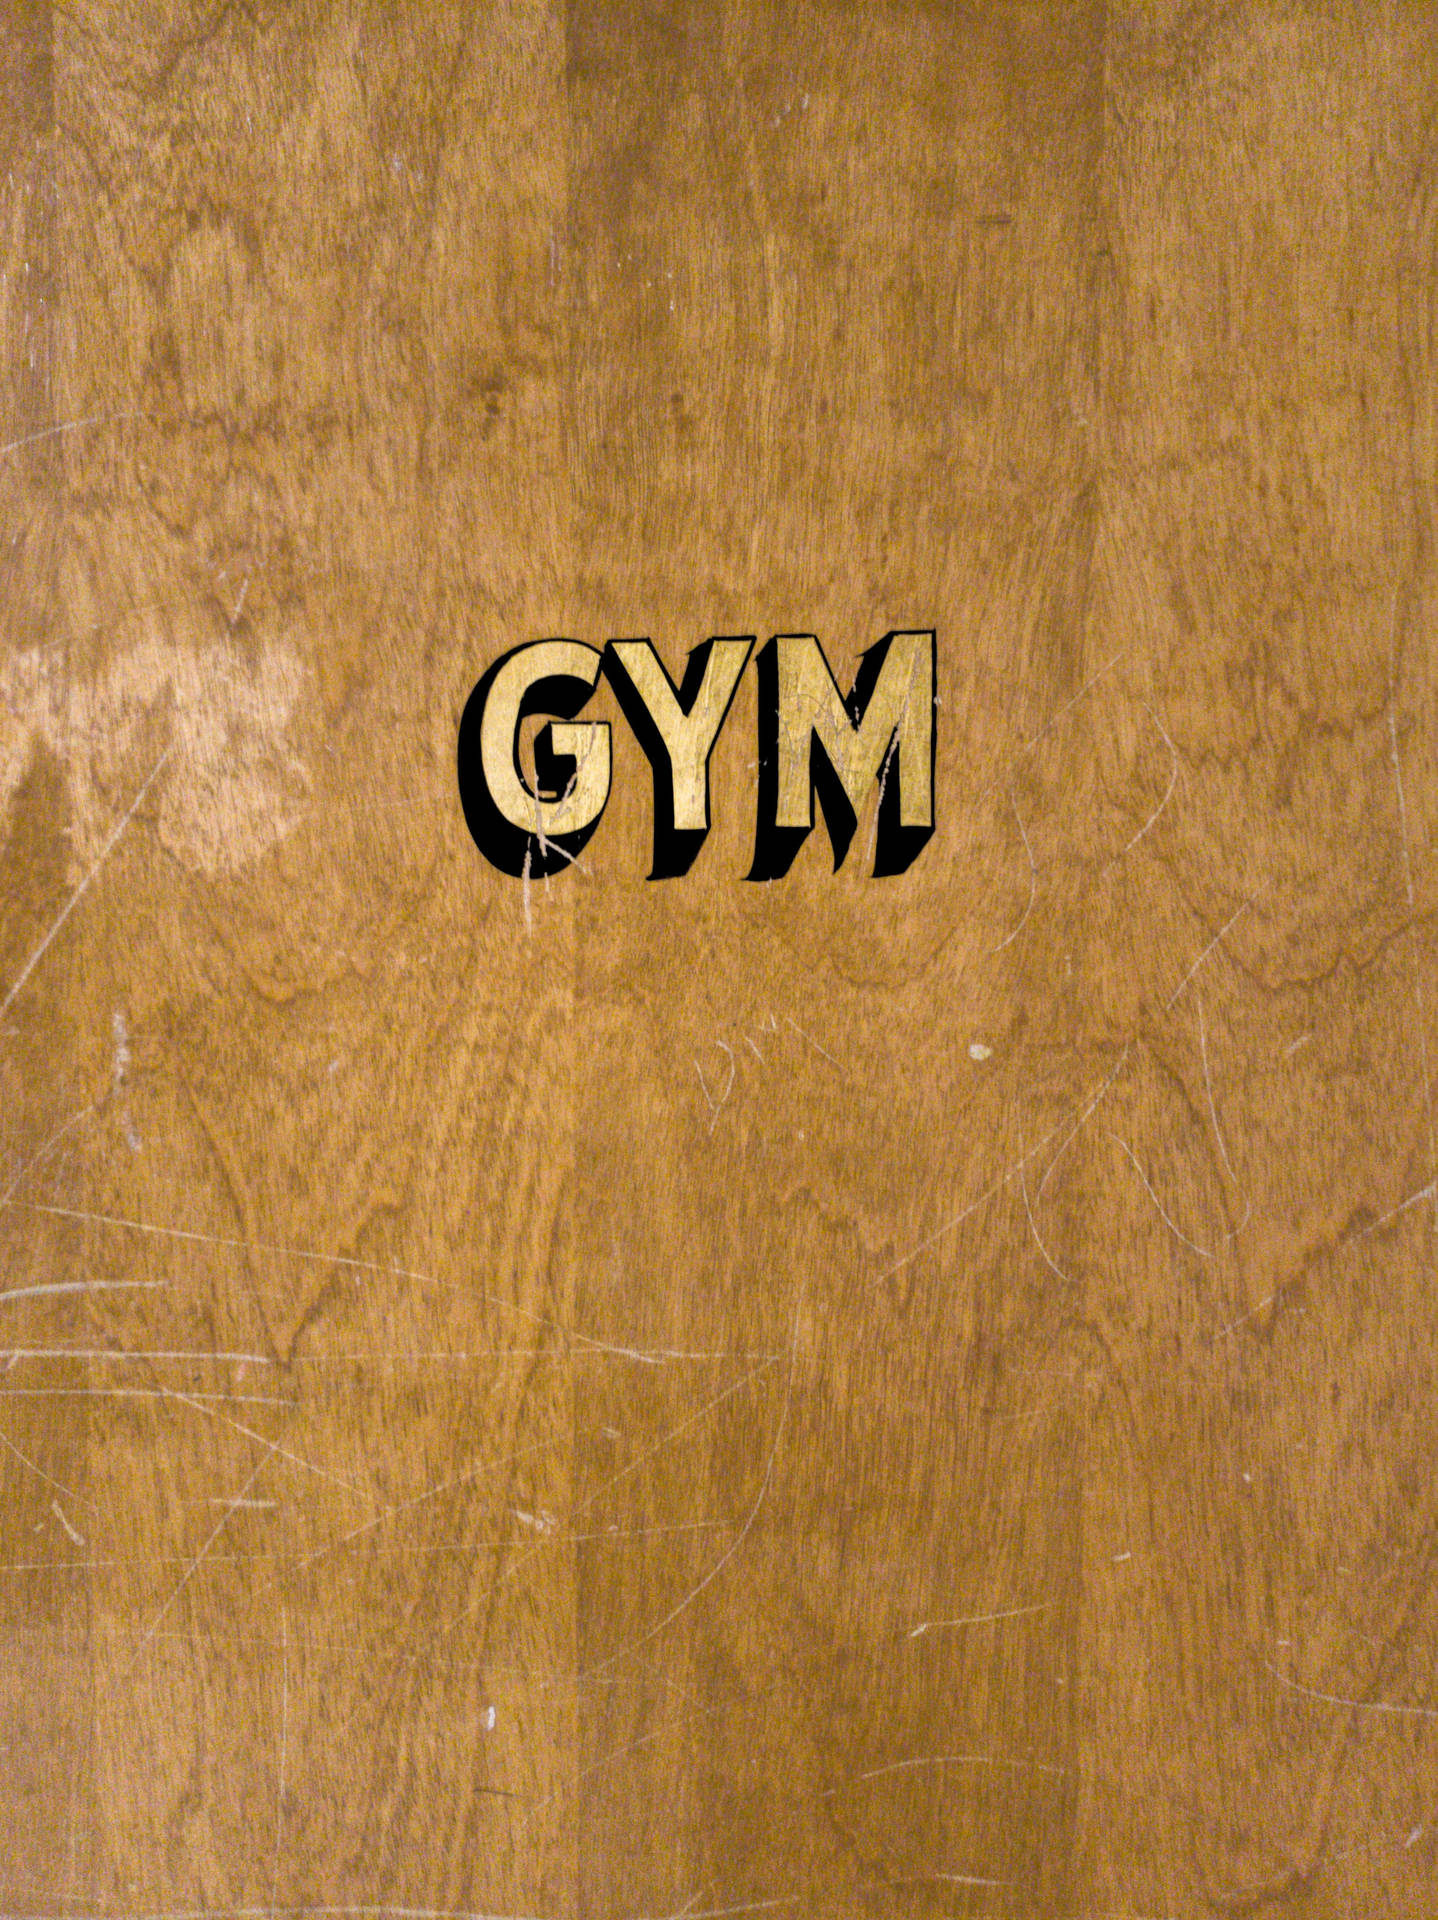 3008X4016 Gym Wallpaper and Background